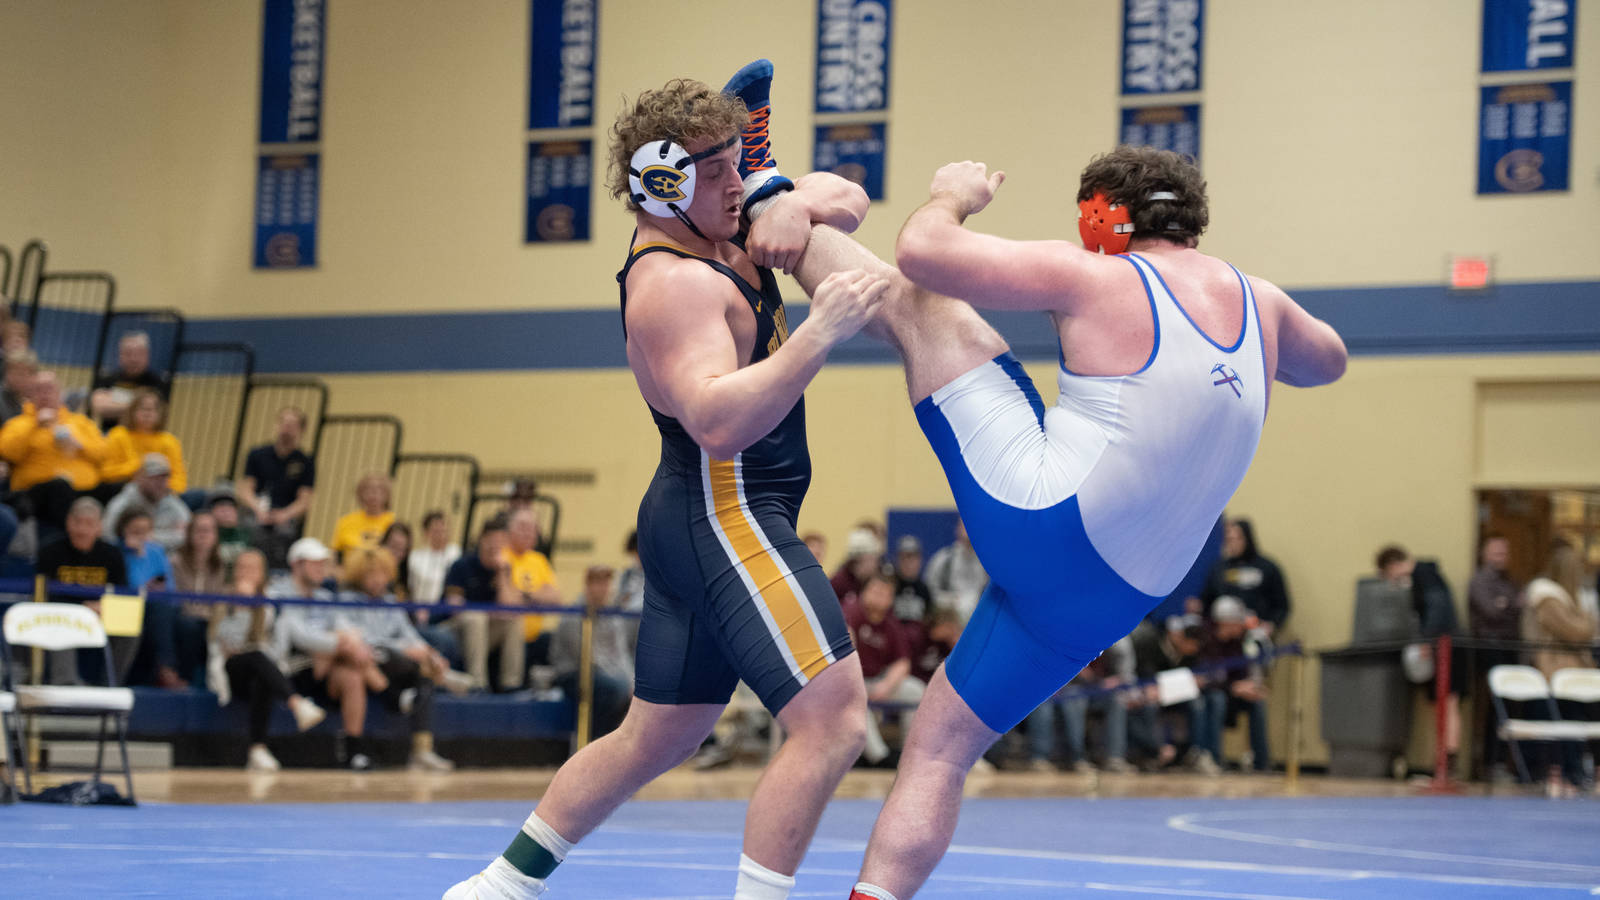 Blugold wrestler has opponent's leg over his shoulder as he works for a pin